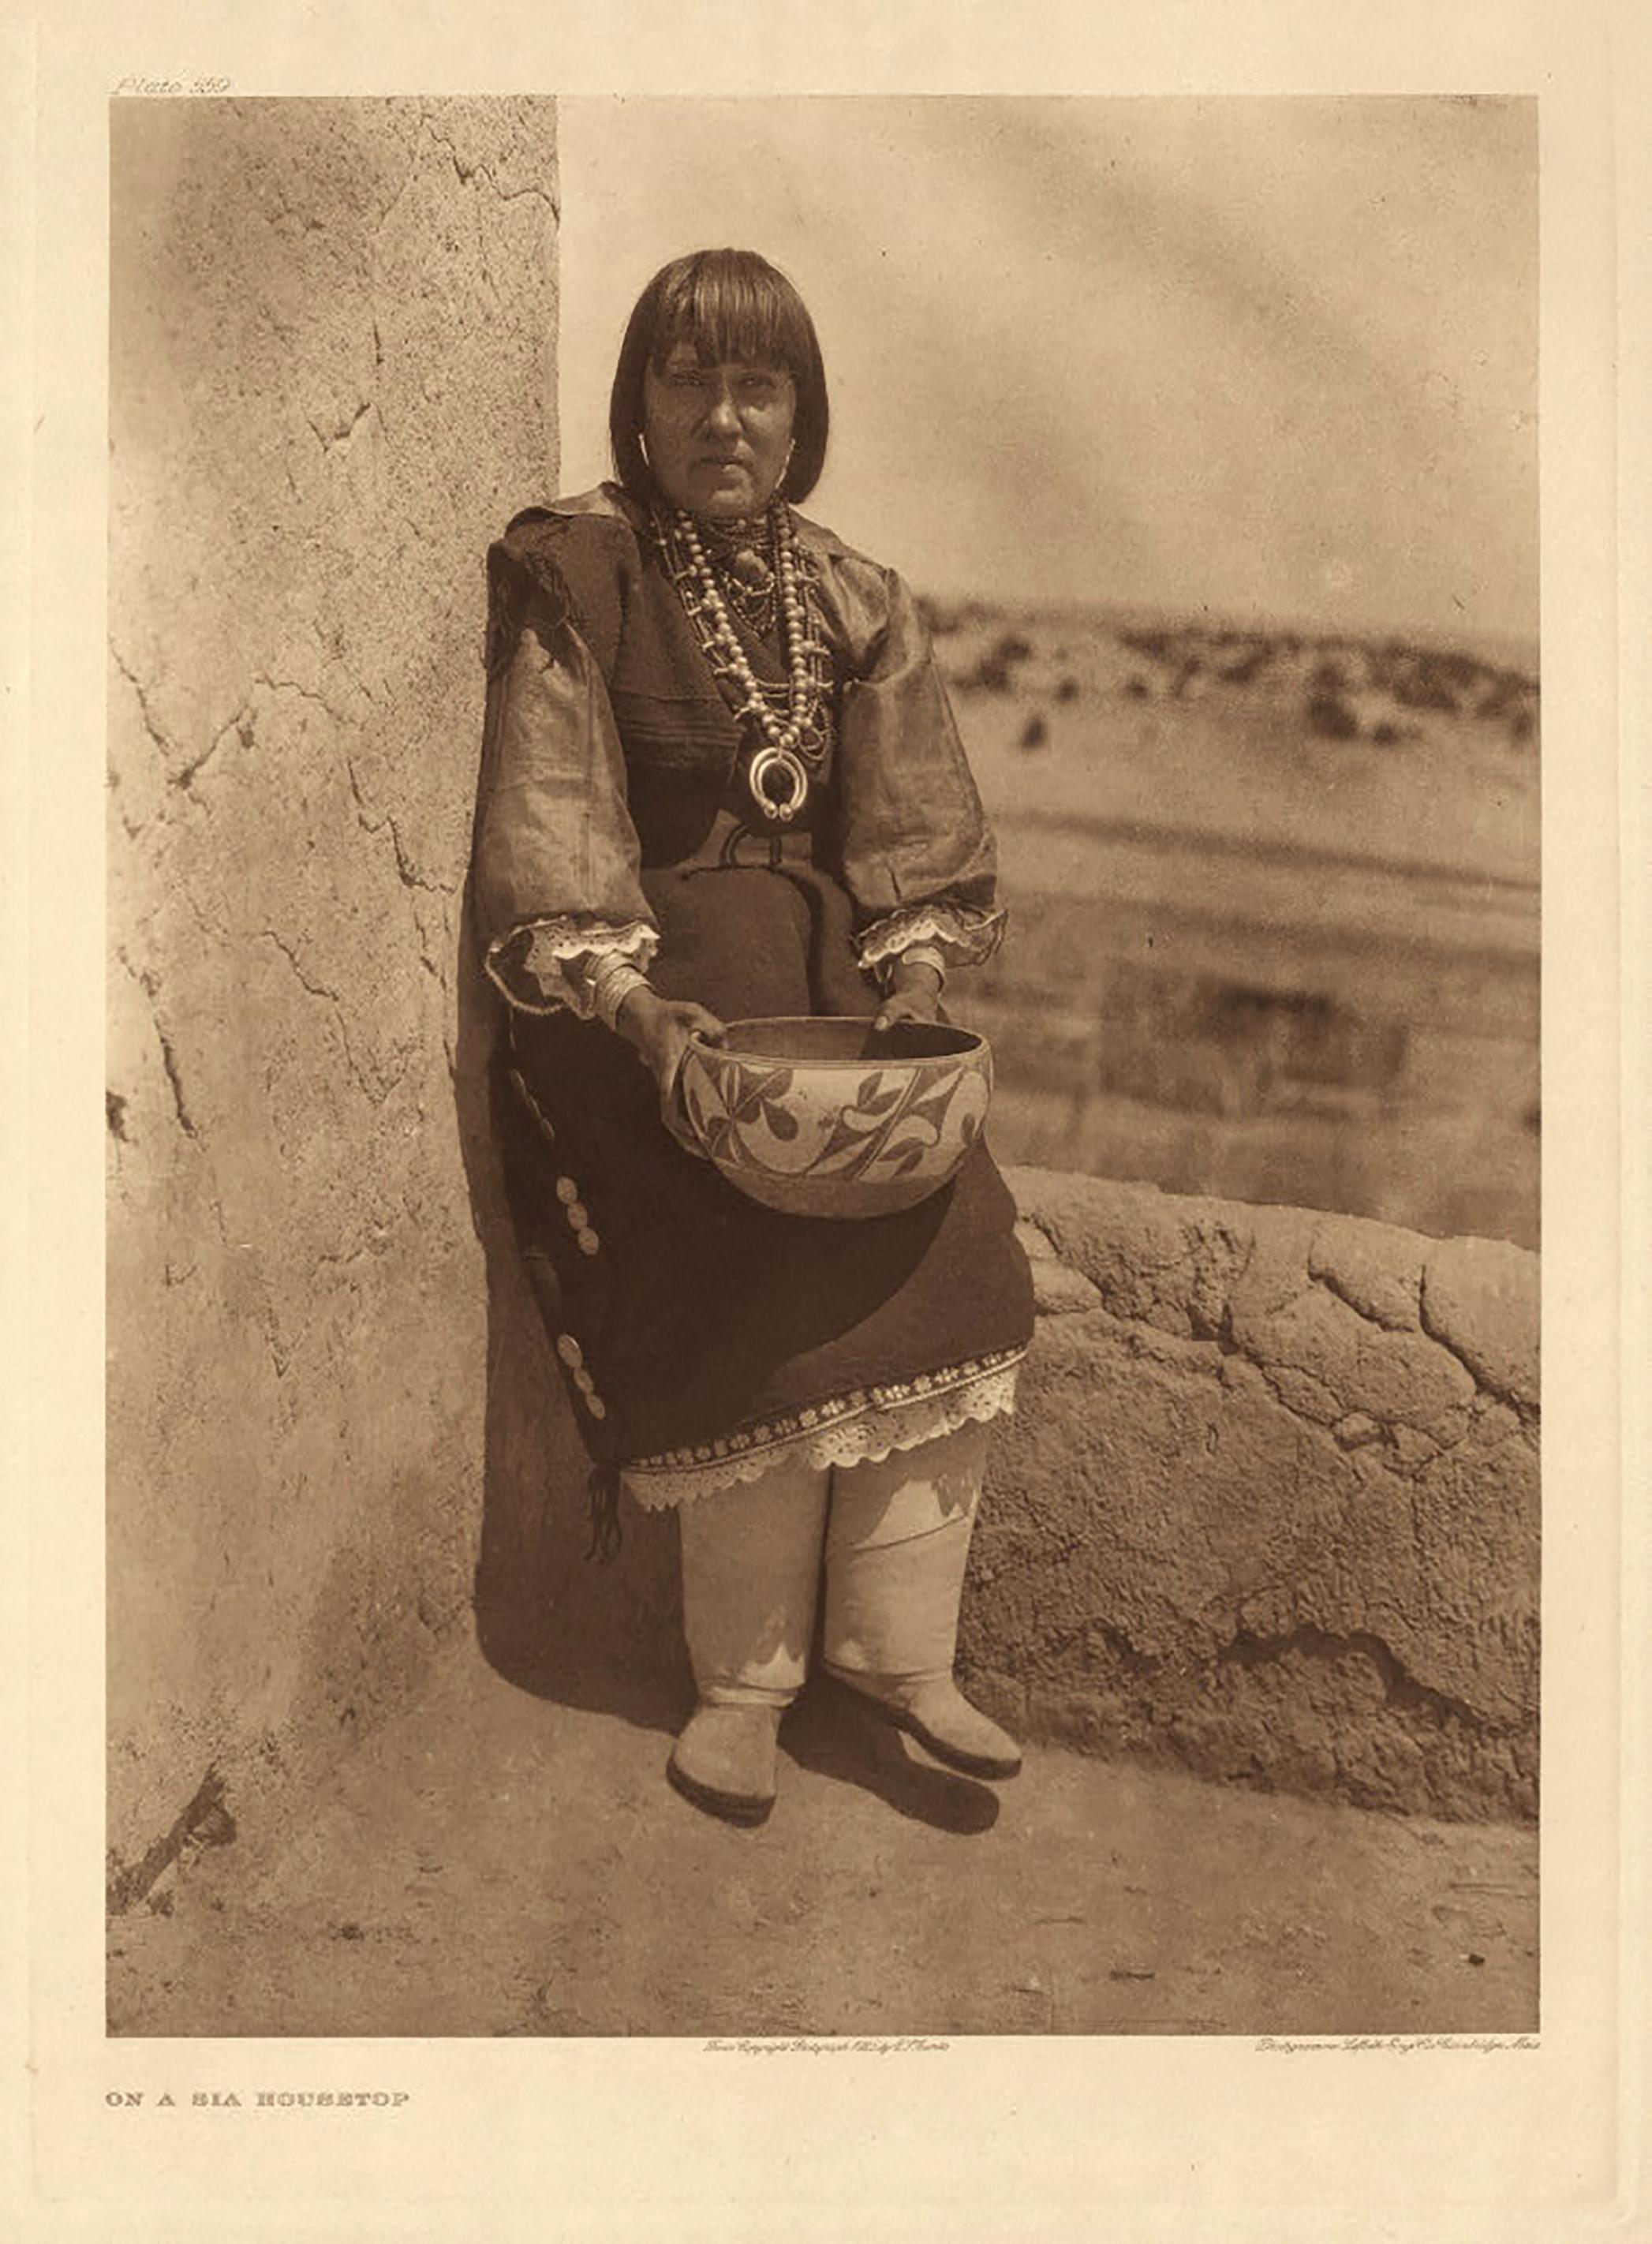 Edward Curtis, On a Sia Housetop, Plate 559, from Portfolio 16, Photogravure on Japan Vellum. Image Size: 18.25 x 13.75".

Born in 1868 near Whitewater, Wisconsin, Edward Sheriff Curtis became one of America’s finest photographers and ethnologists.